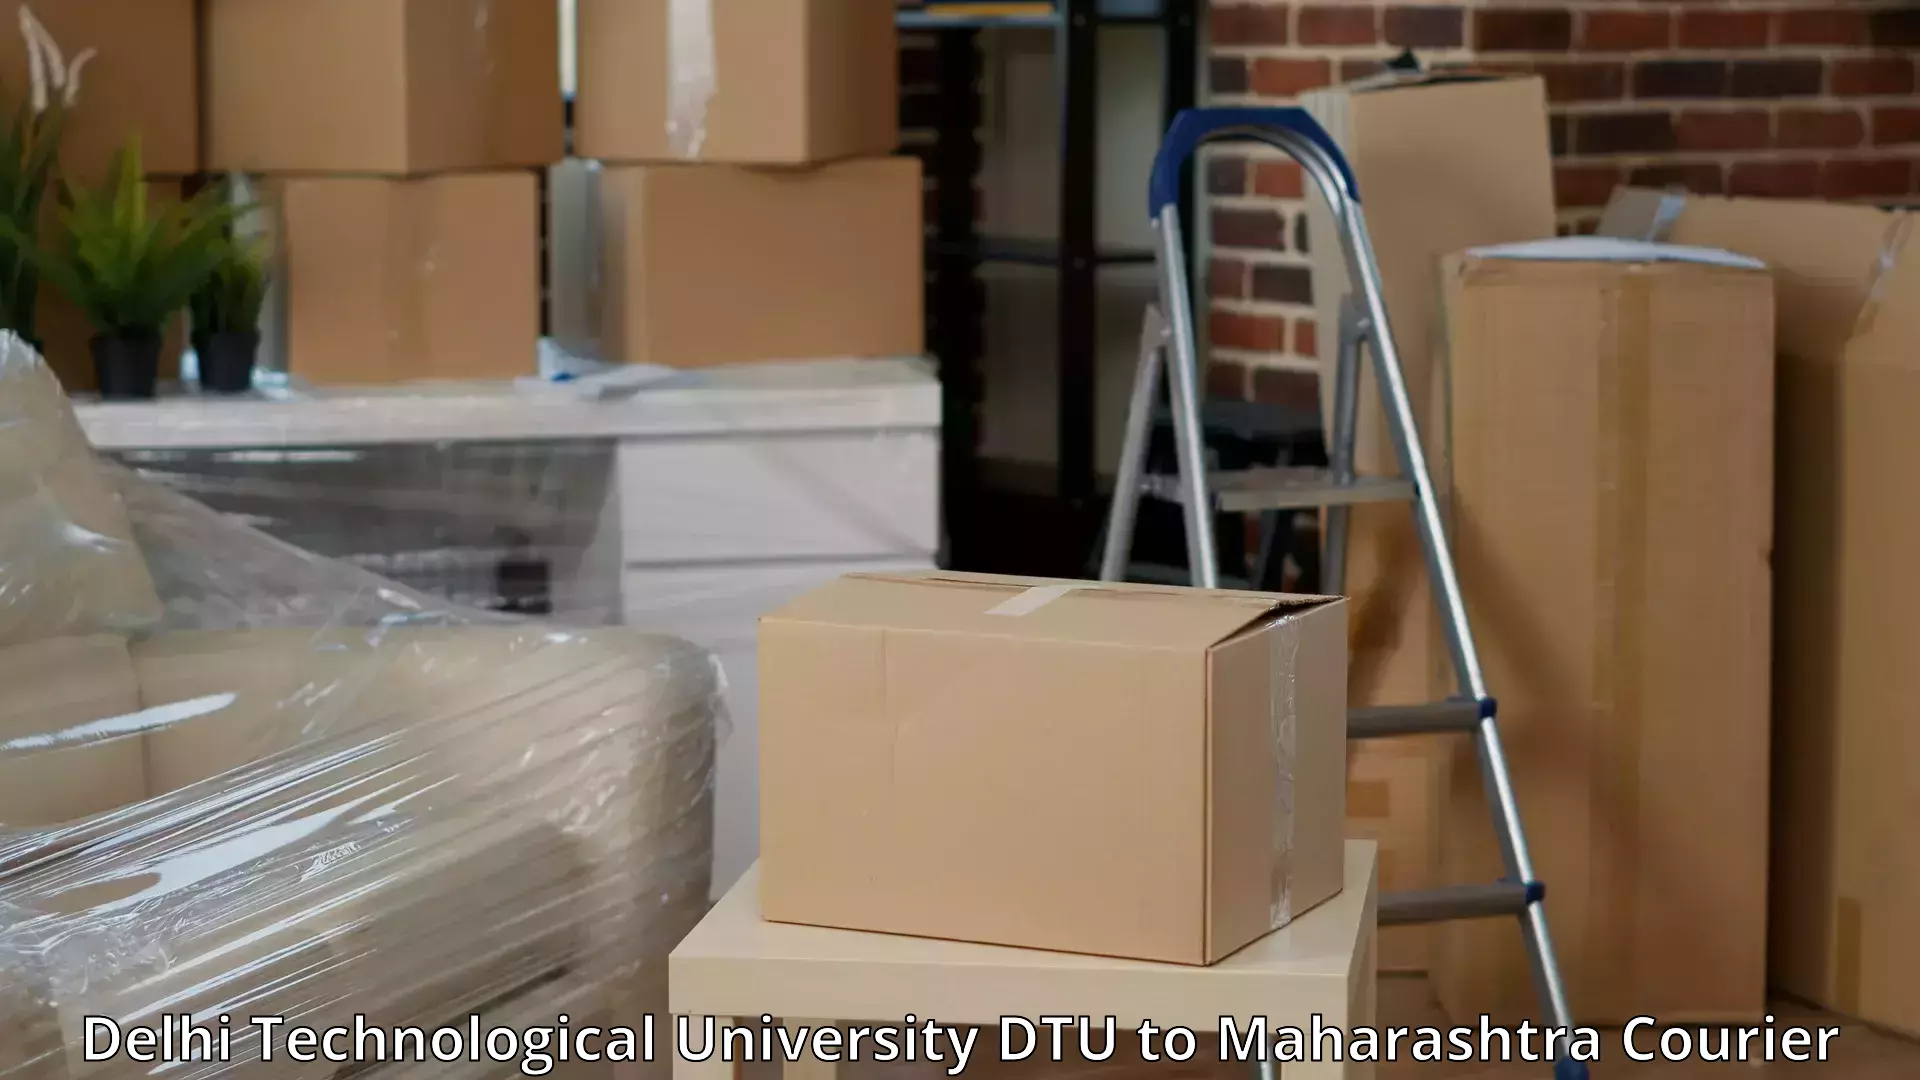 Affordable household movers Delhi Technological University DTU to Indapur